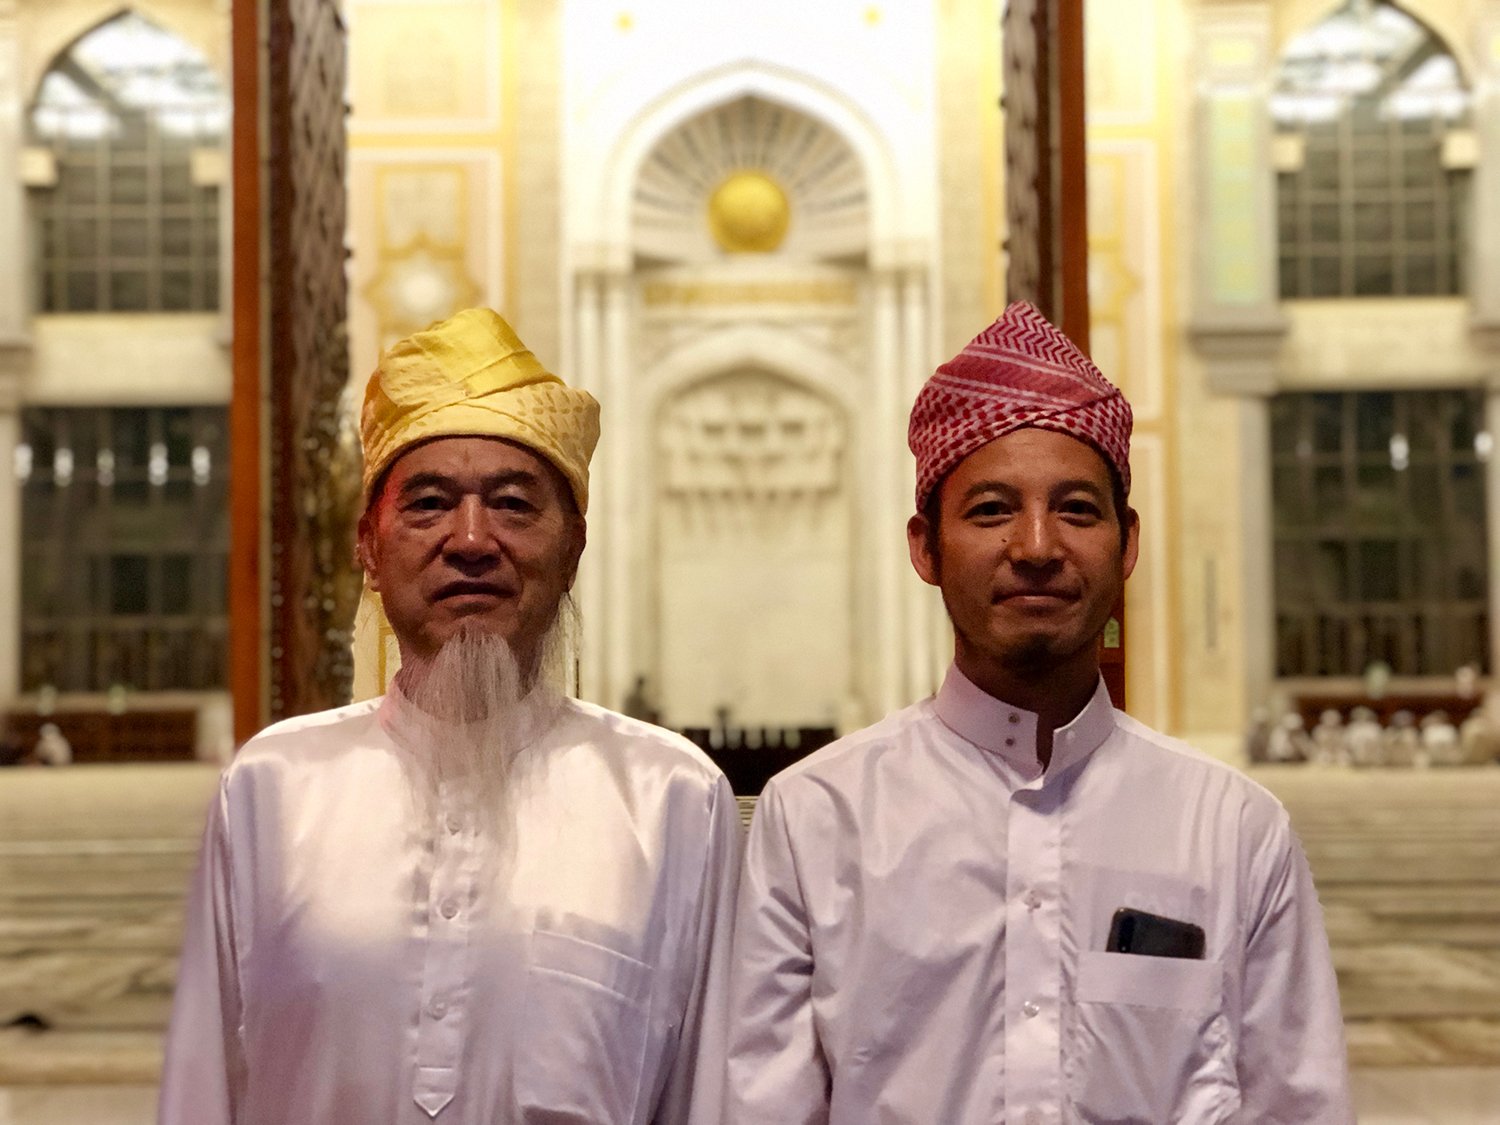 Two imams outside the Grand Mosque in Shadian, China.